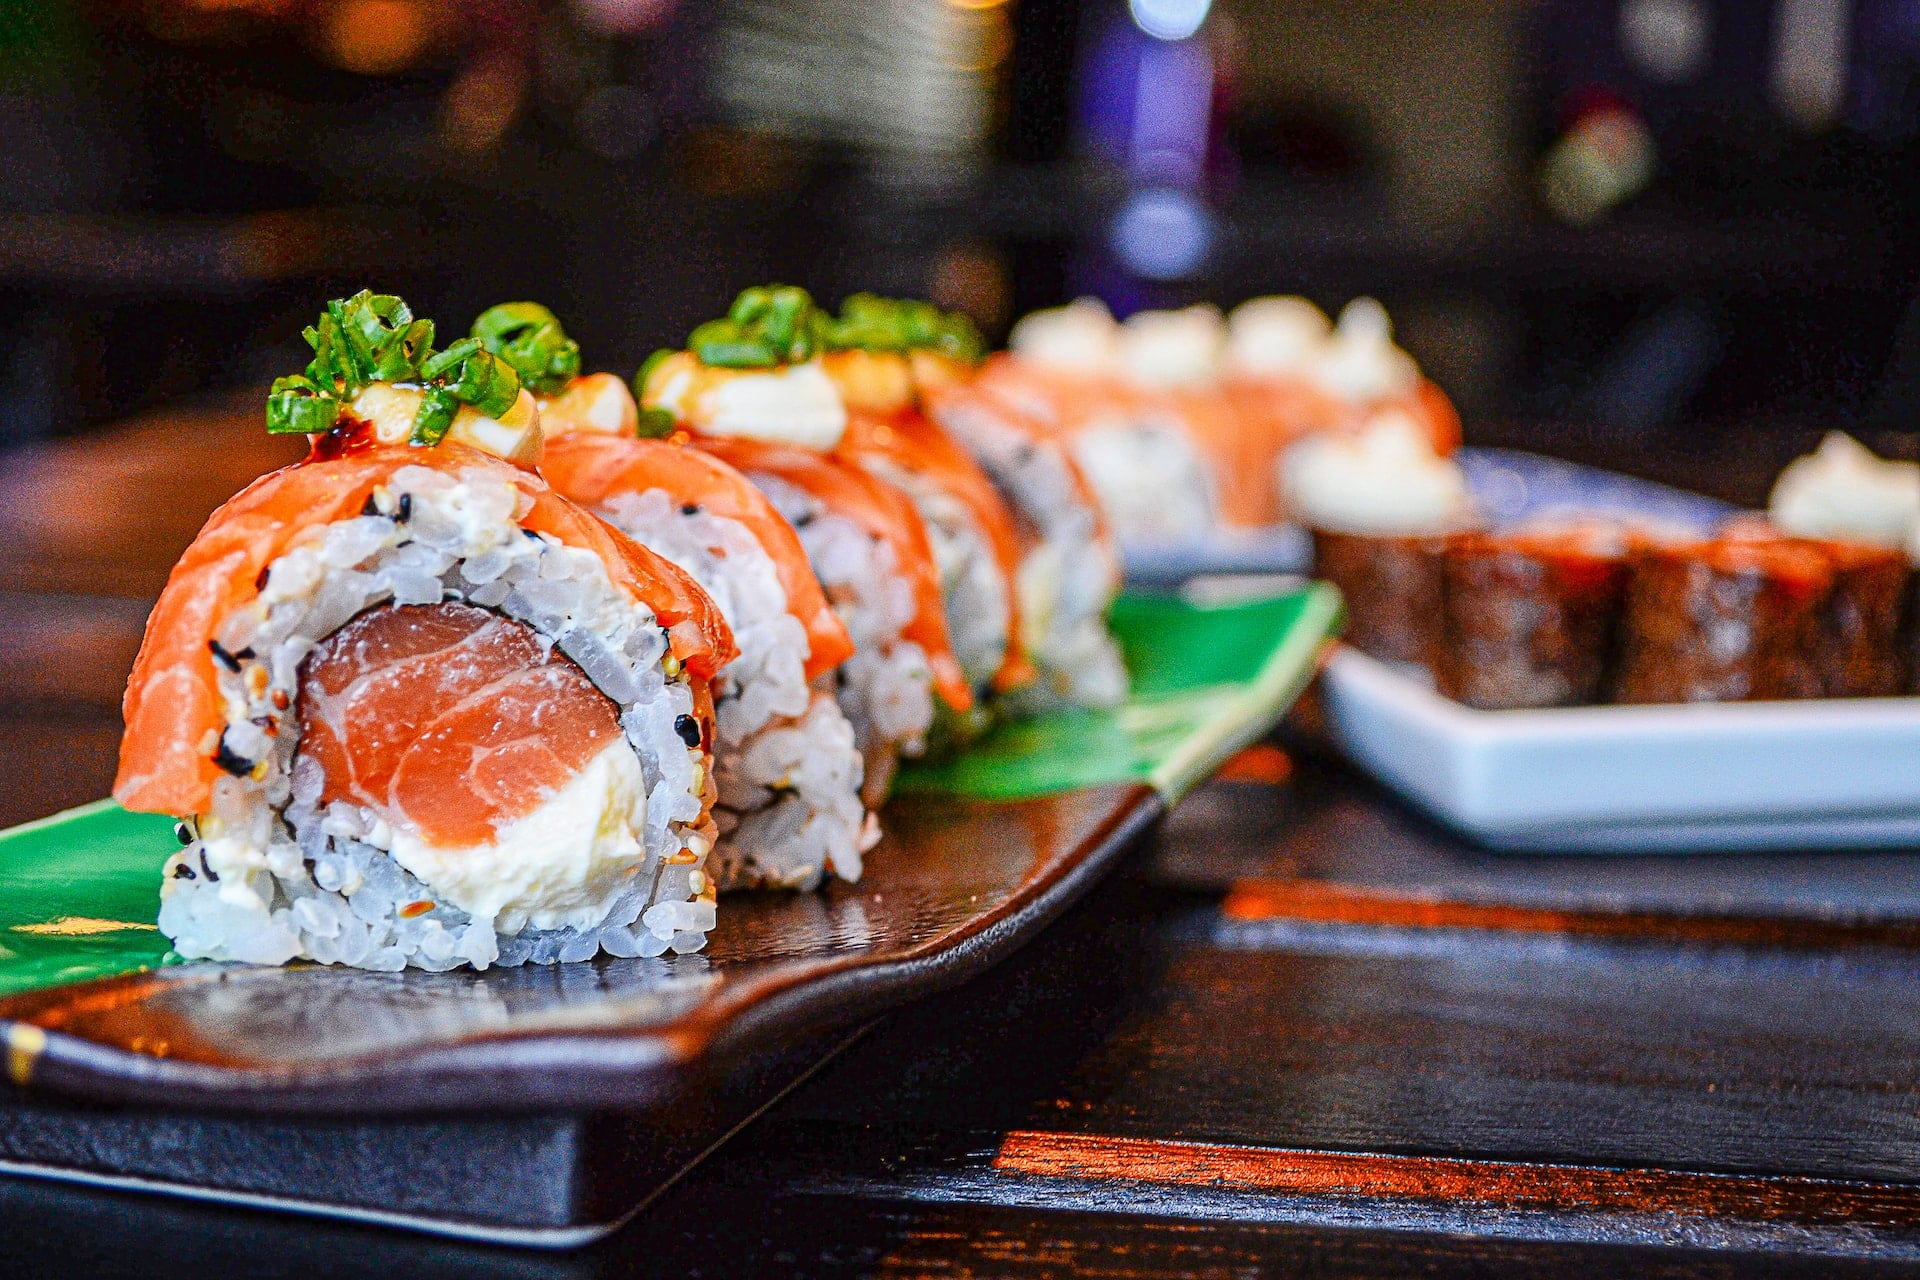 Going long on SUSHI? You should take a look at these metrics first